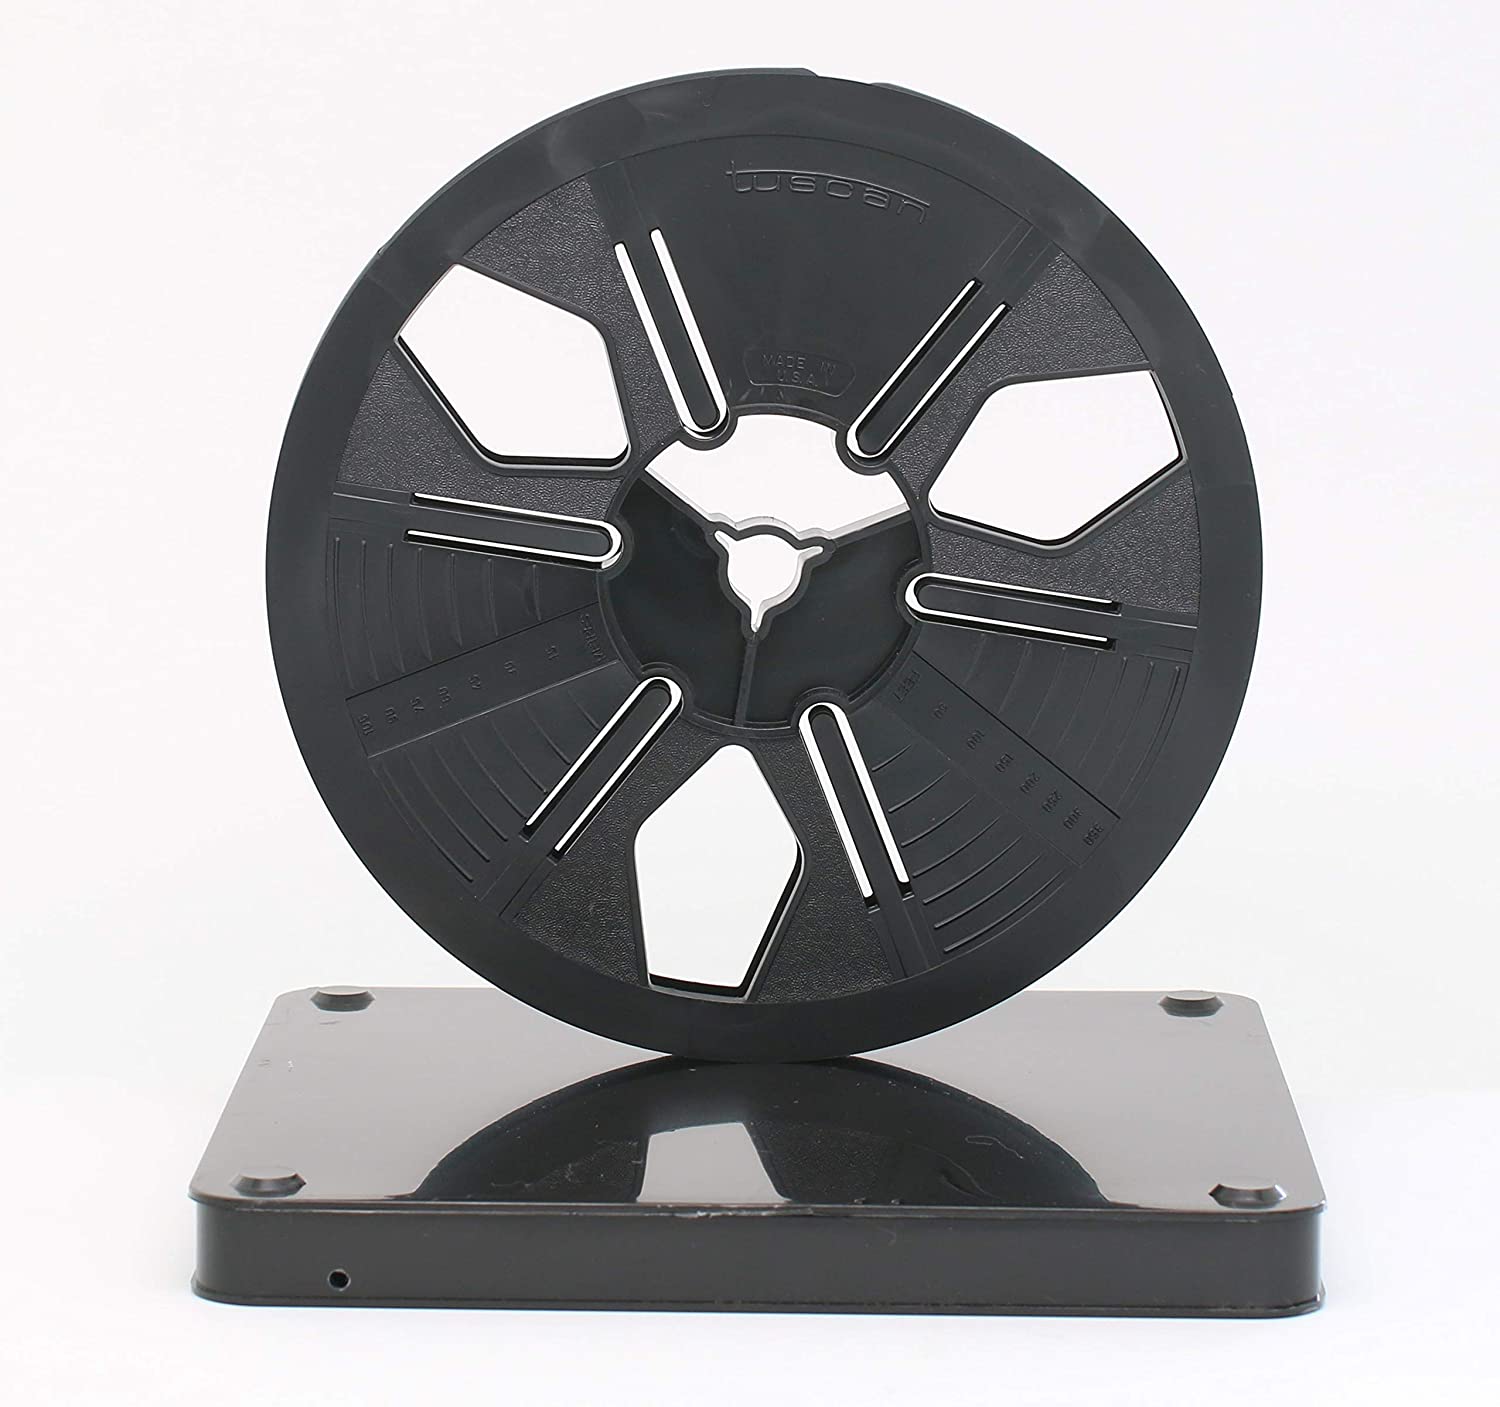 Super 8mm 400ft Plastic Reel and Can – Liaison of Independent